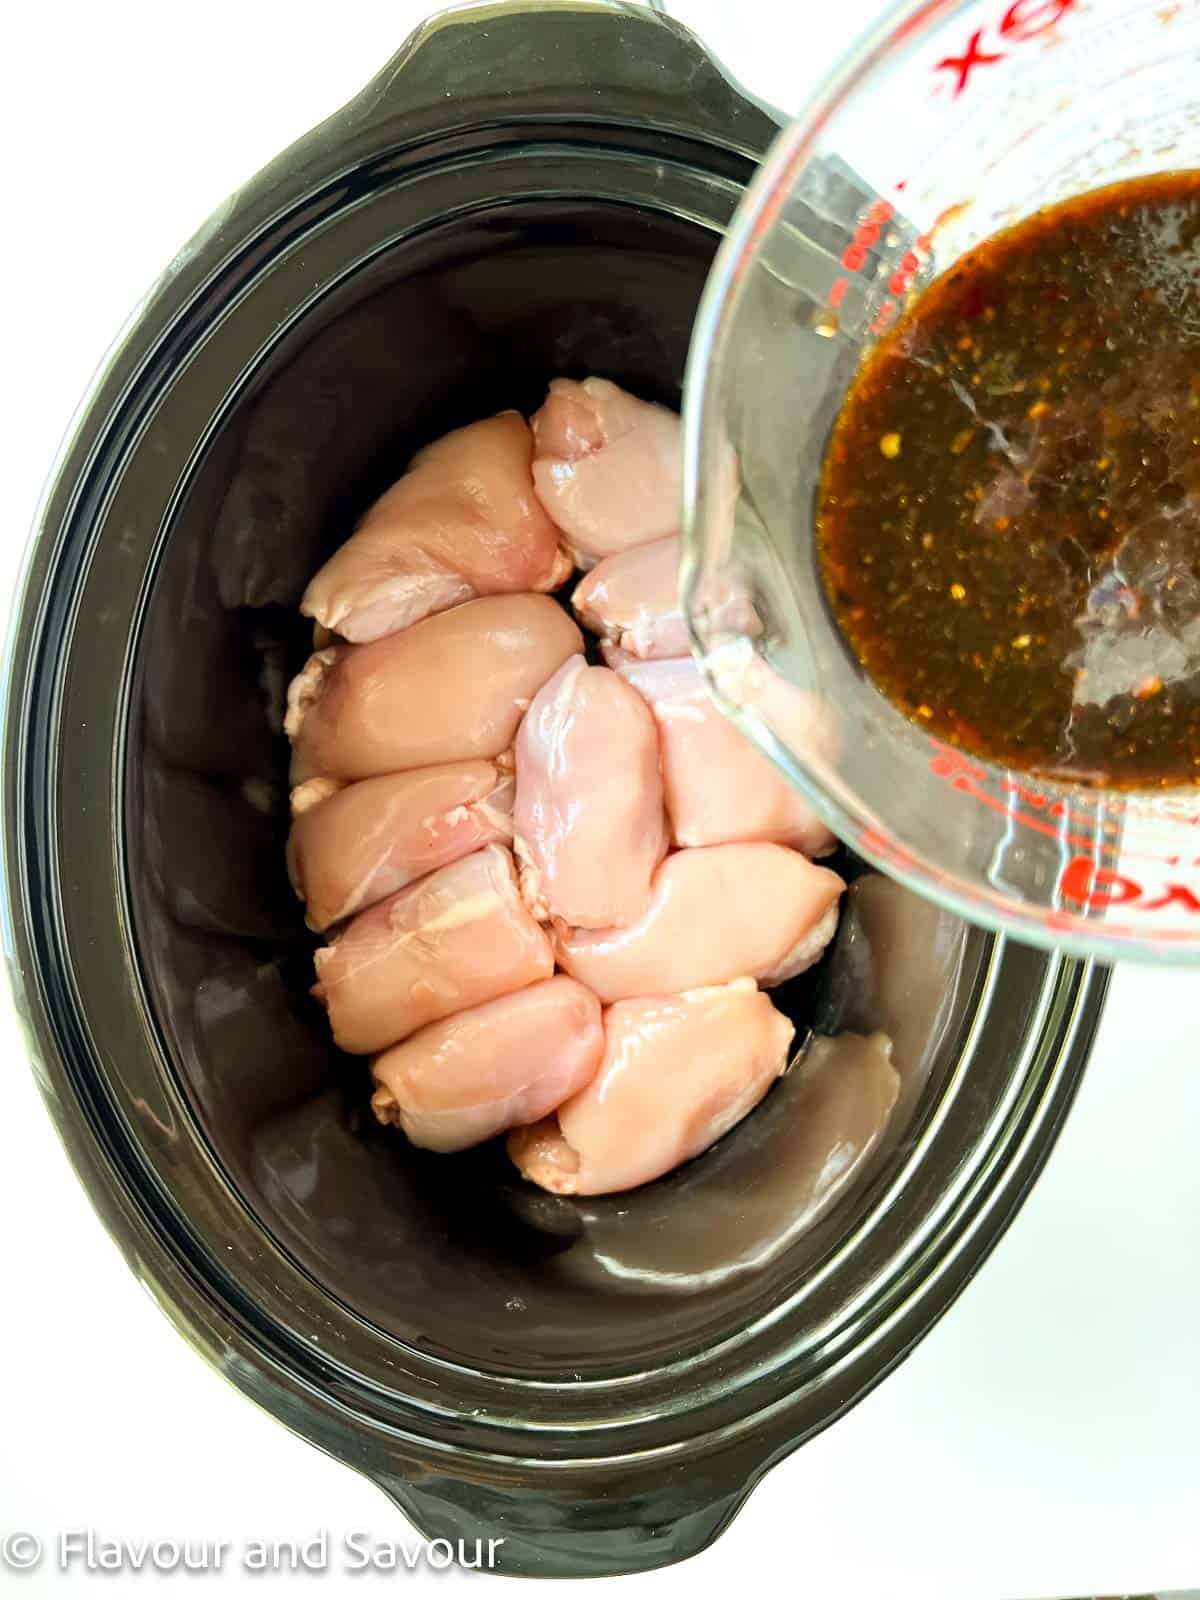 Pouring sauce over raw chicken thighs in a slow cooker.